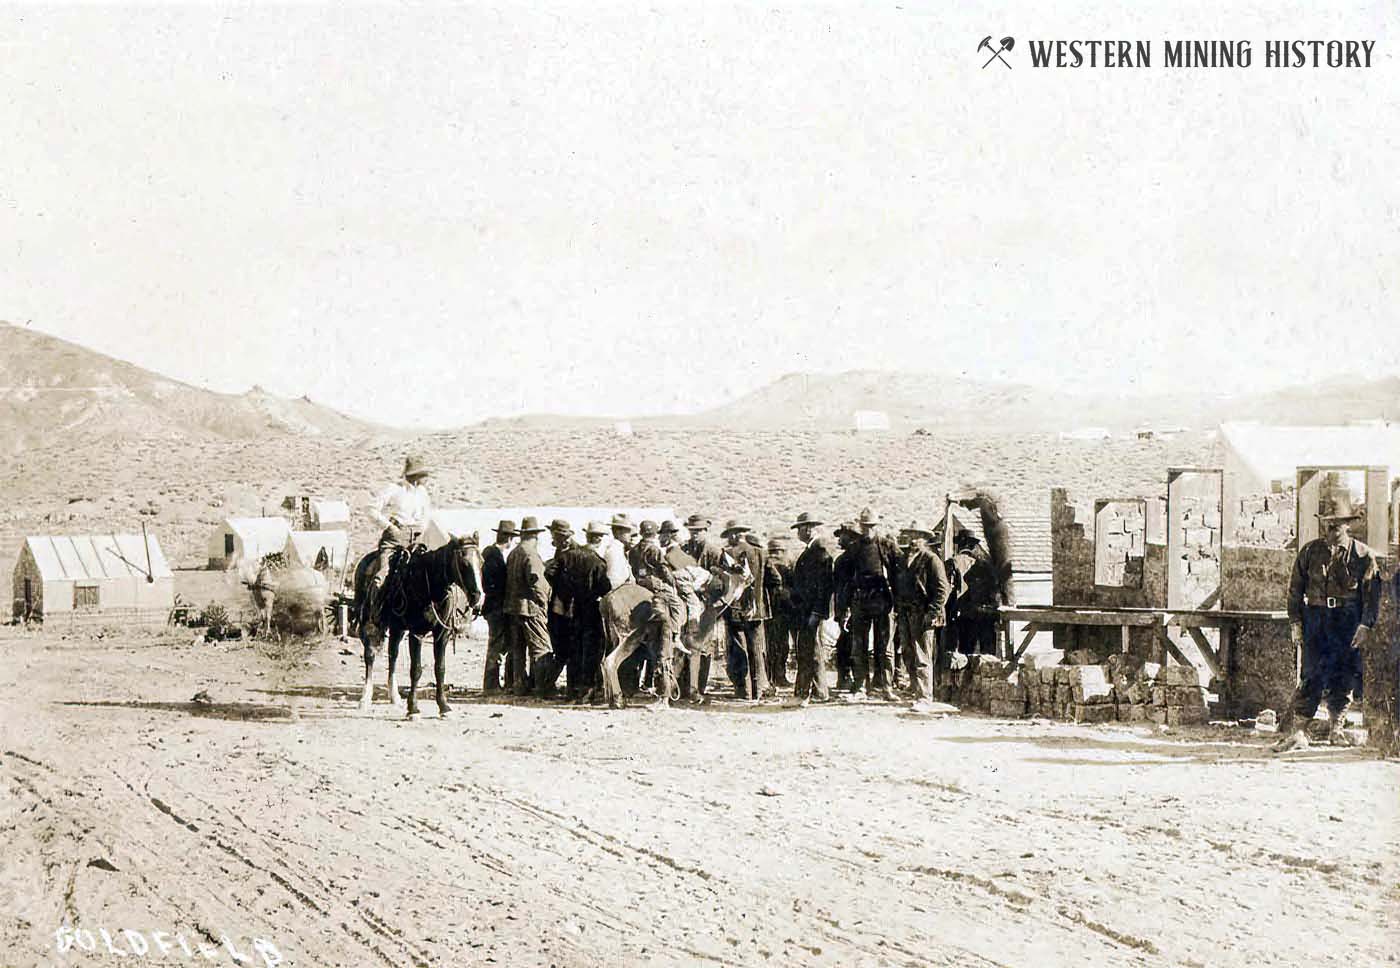 Moving a Squatter - Goldfield, Nevada ca. 1904